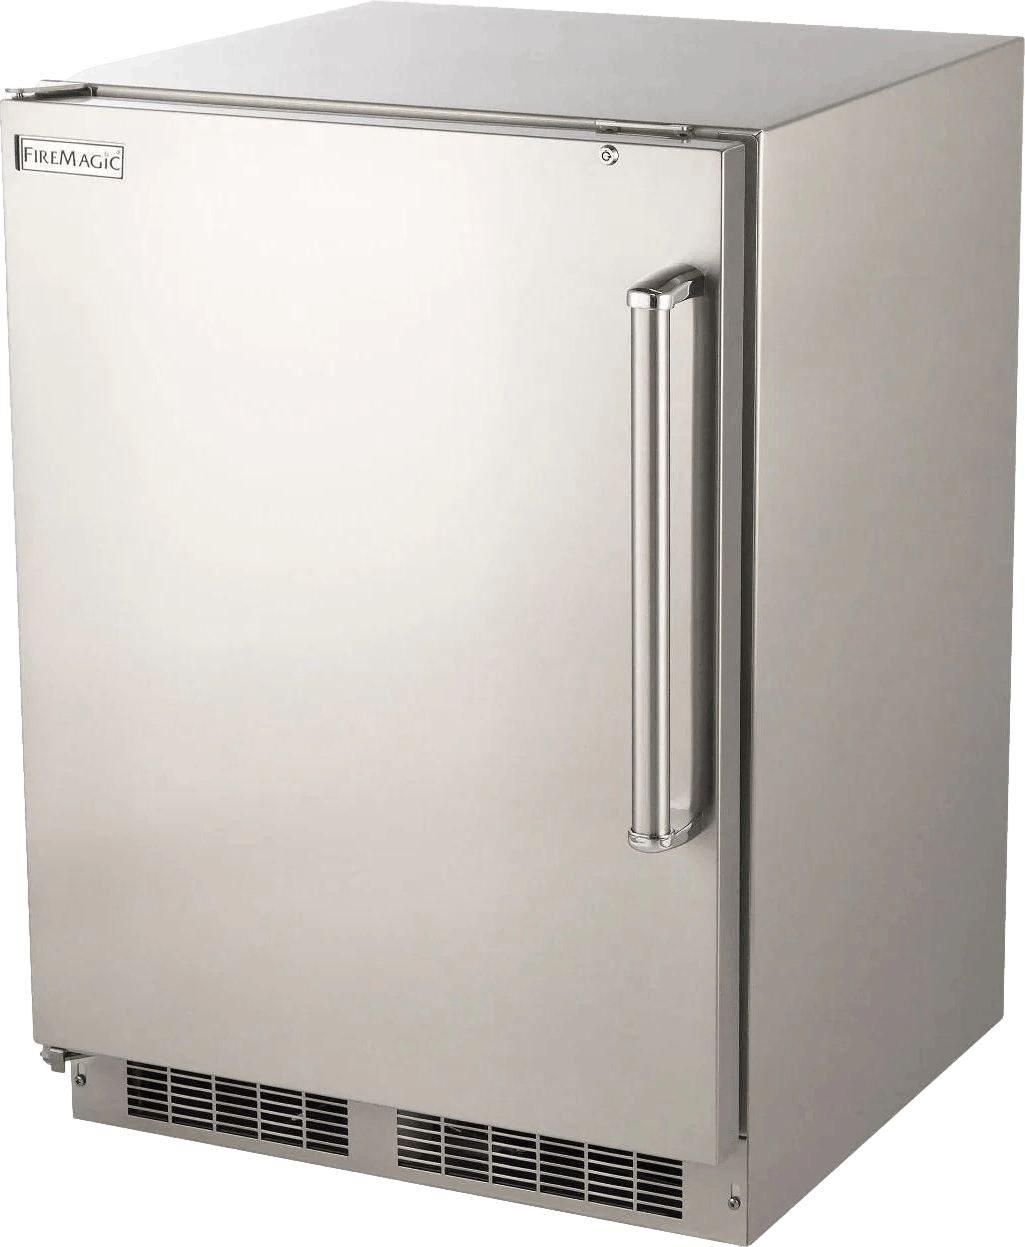 Fire Magic Outdoor Rated Refrigerator · Left